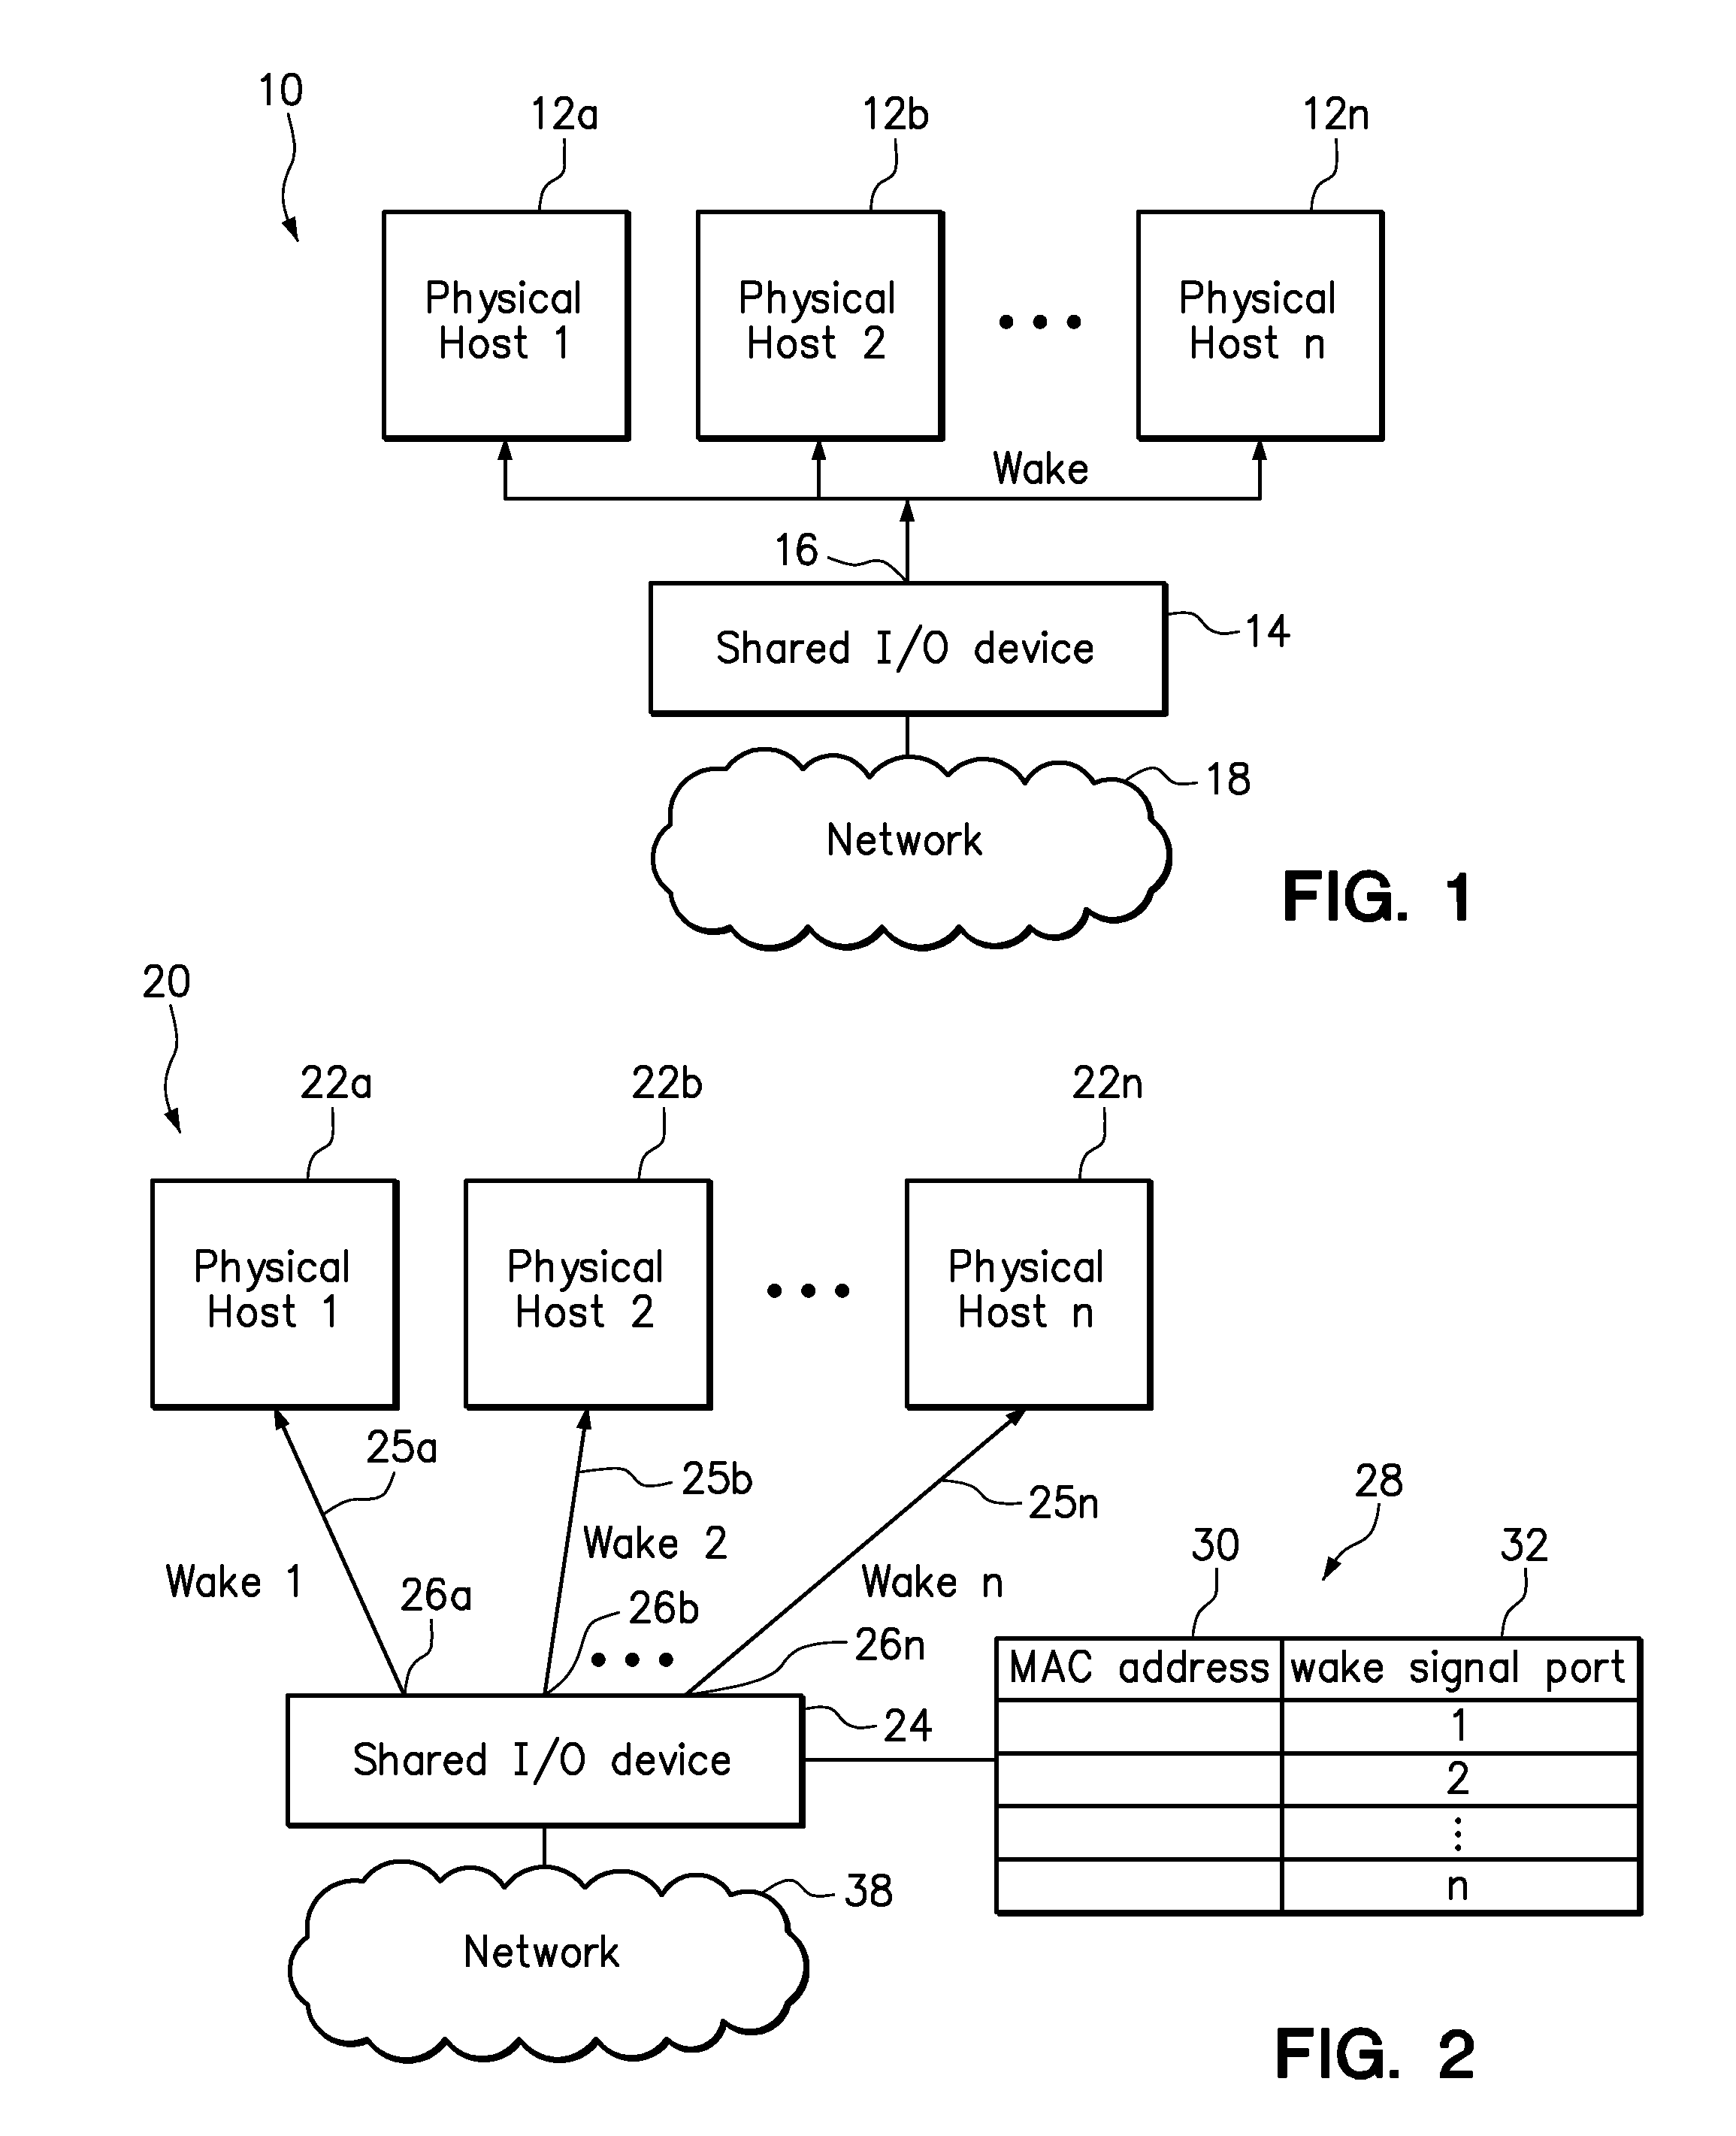 Wake on local area network signalling in a multi-root I/O virtualization